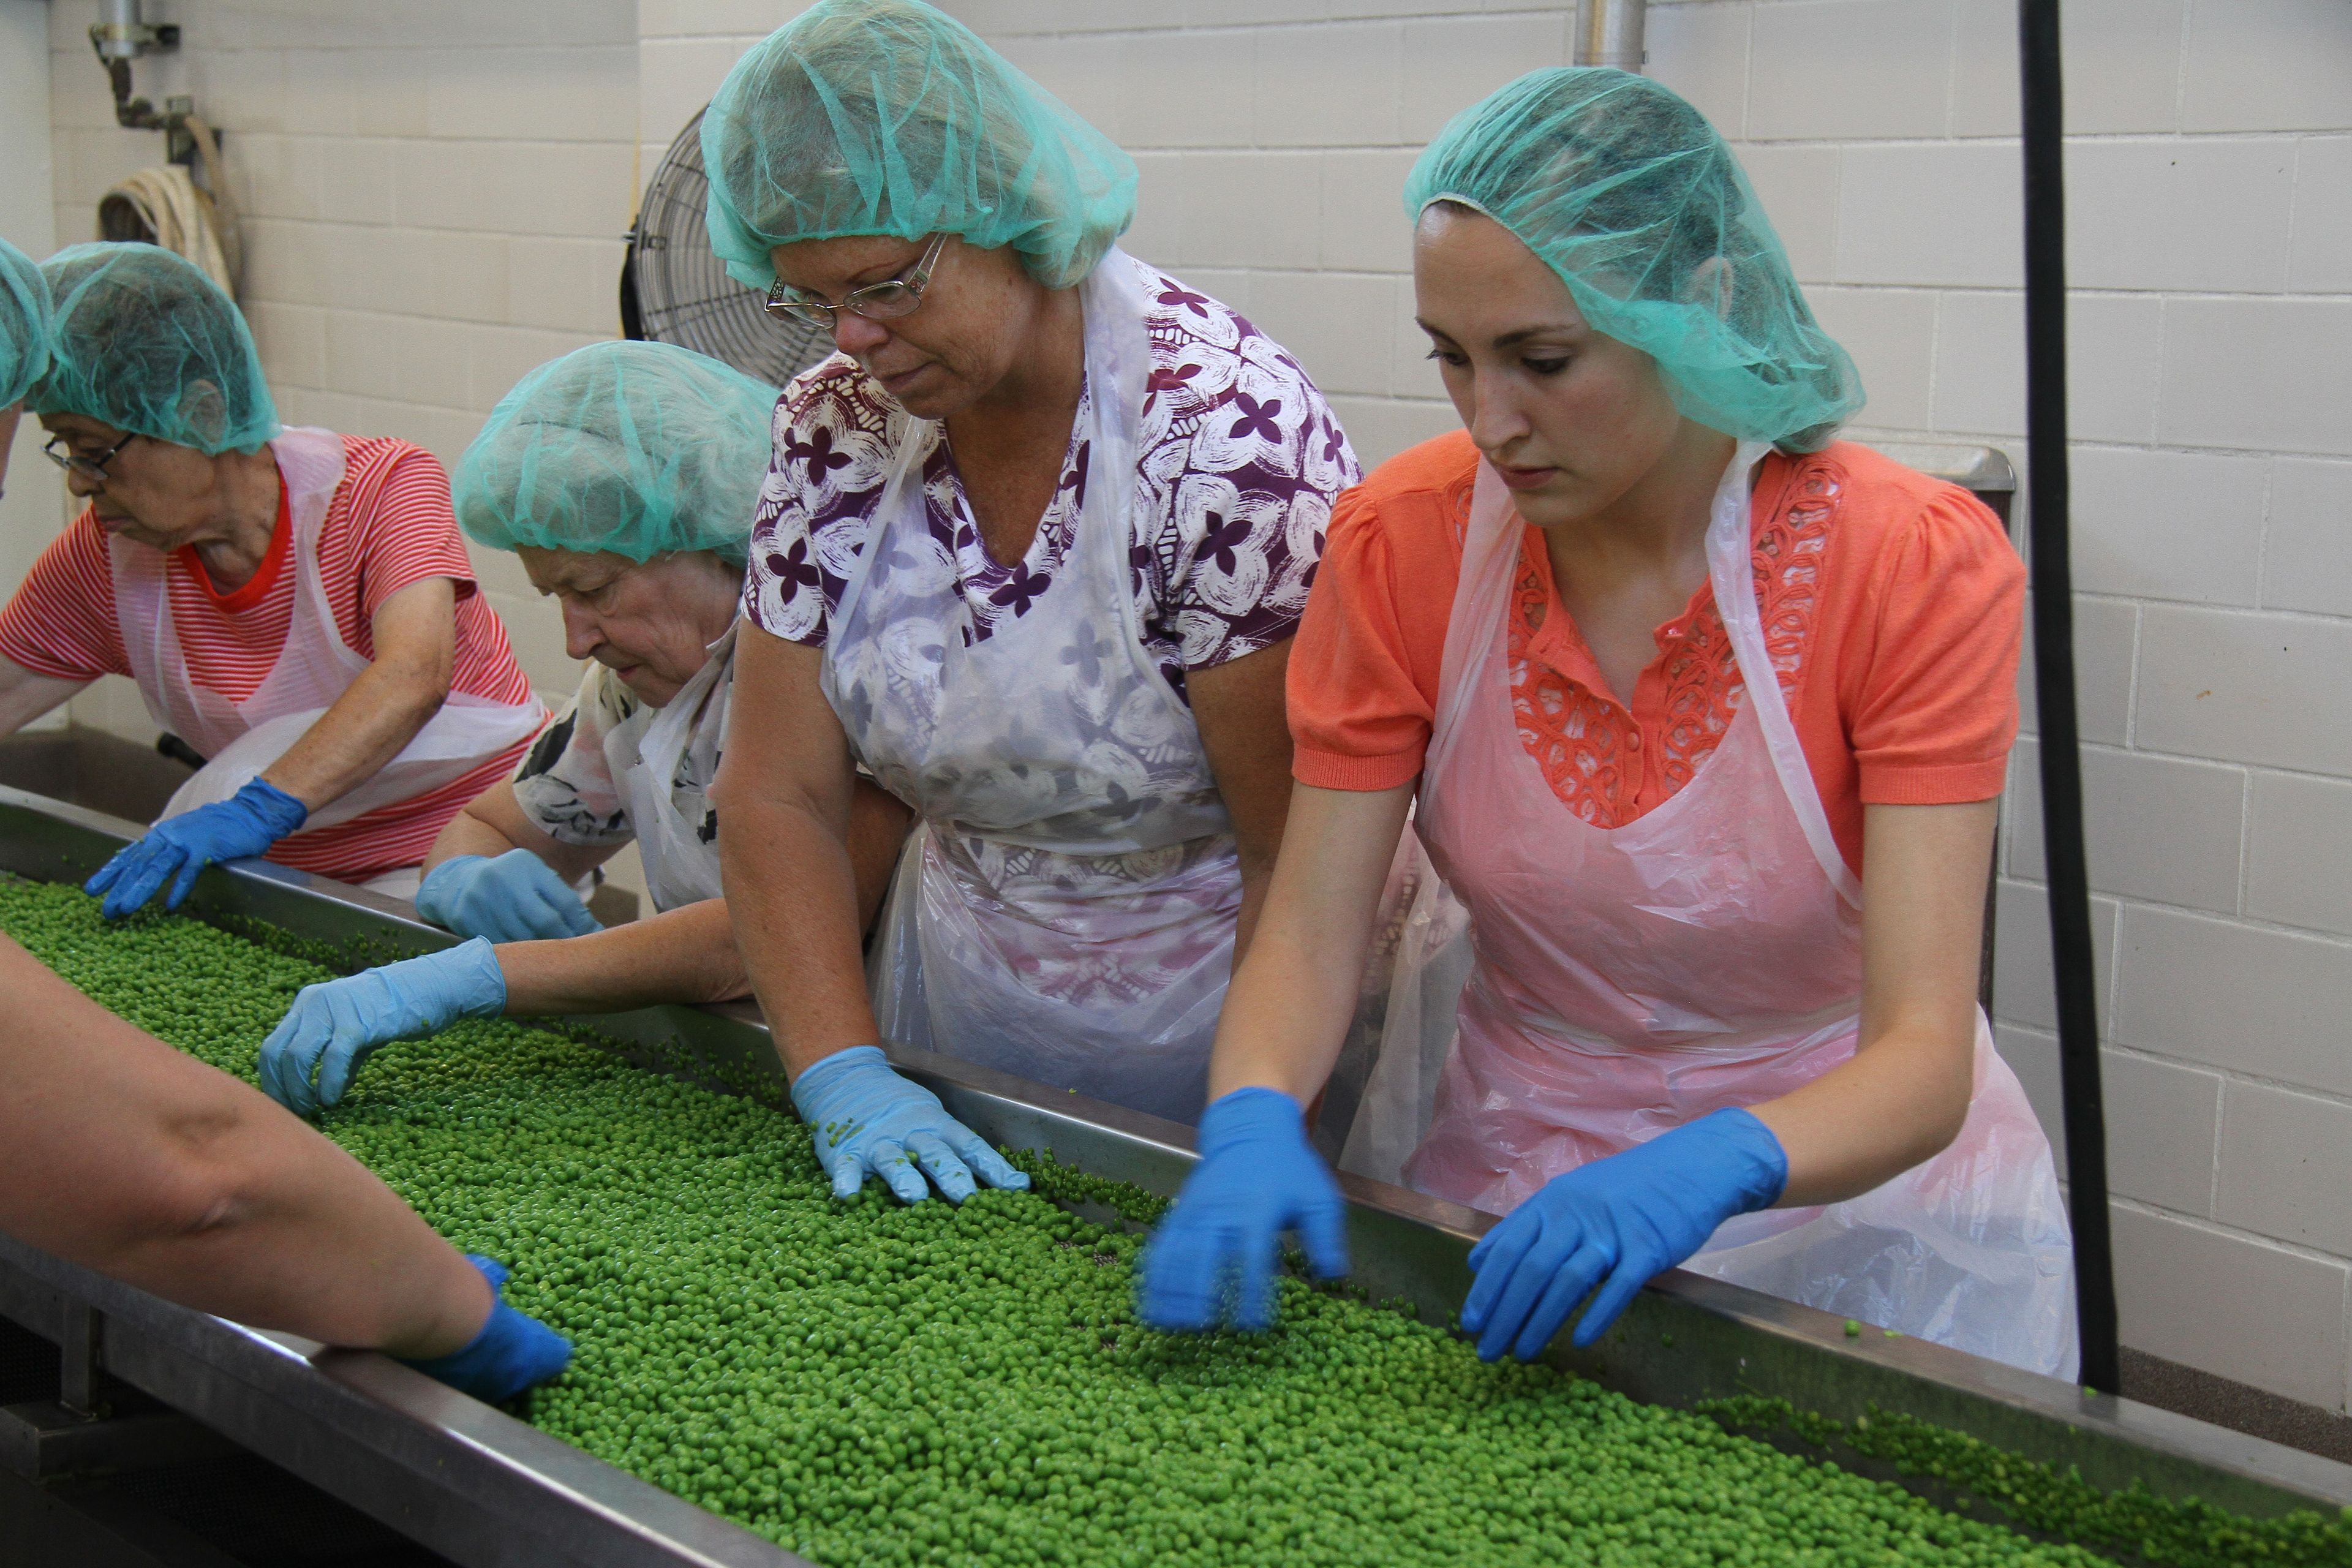 Women serving at the cannery, sorting peas.